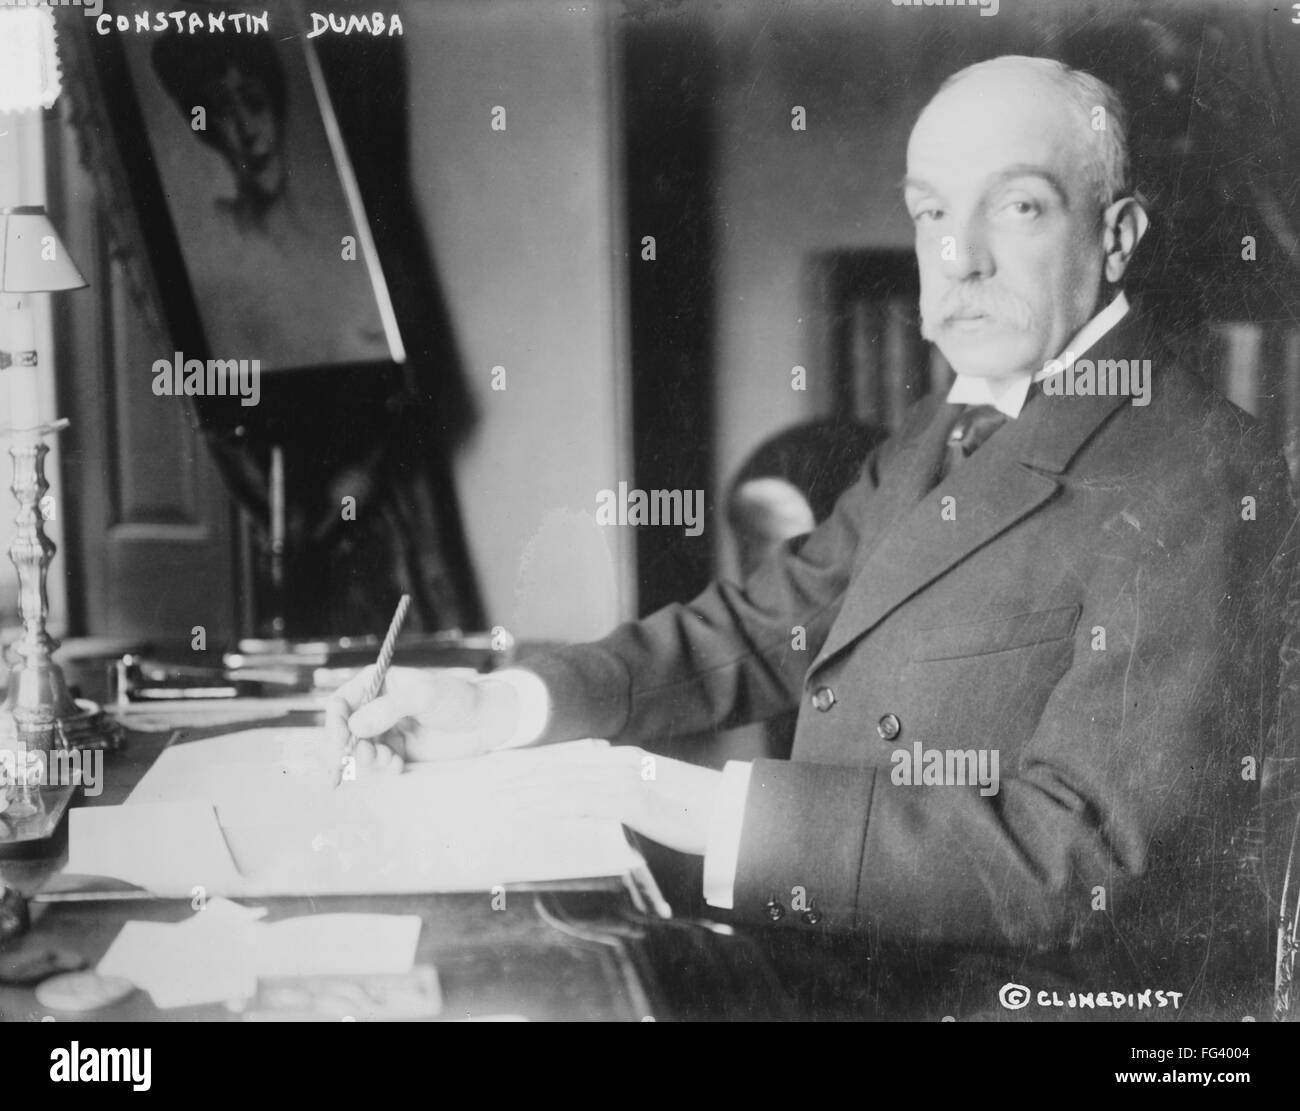 KONSTANTIN DUMBA /n(1856-1947). Austro-Hungarian diplomat to the United States accused of espionage during World War I. Photograph, c1913. Stock Photo